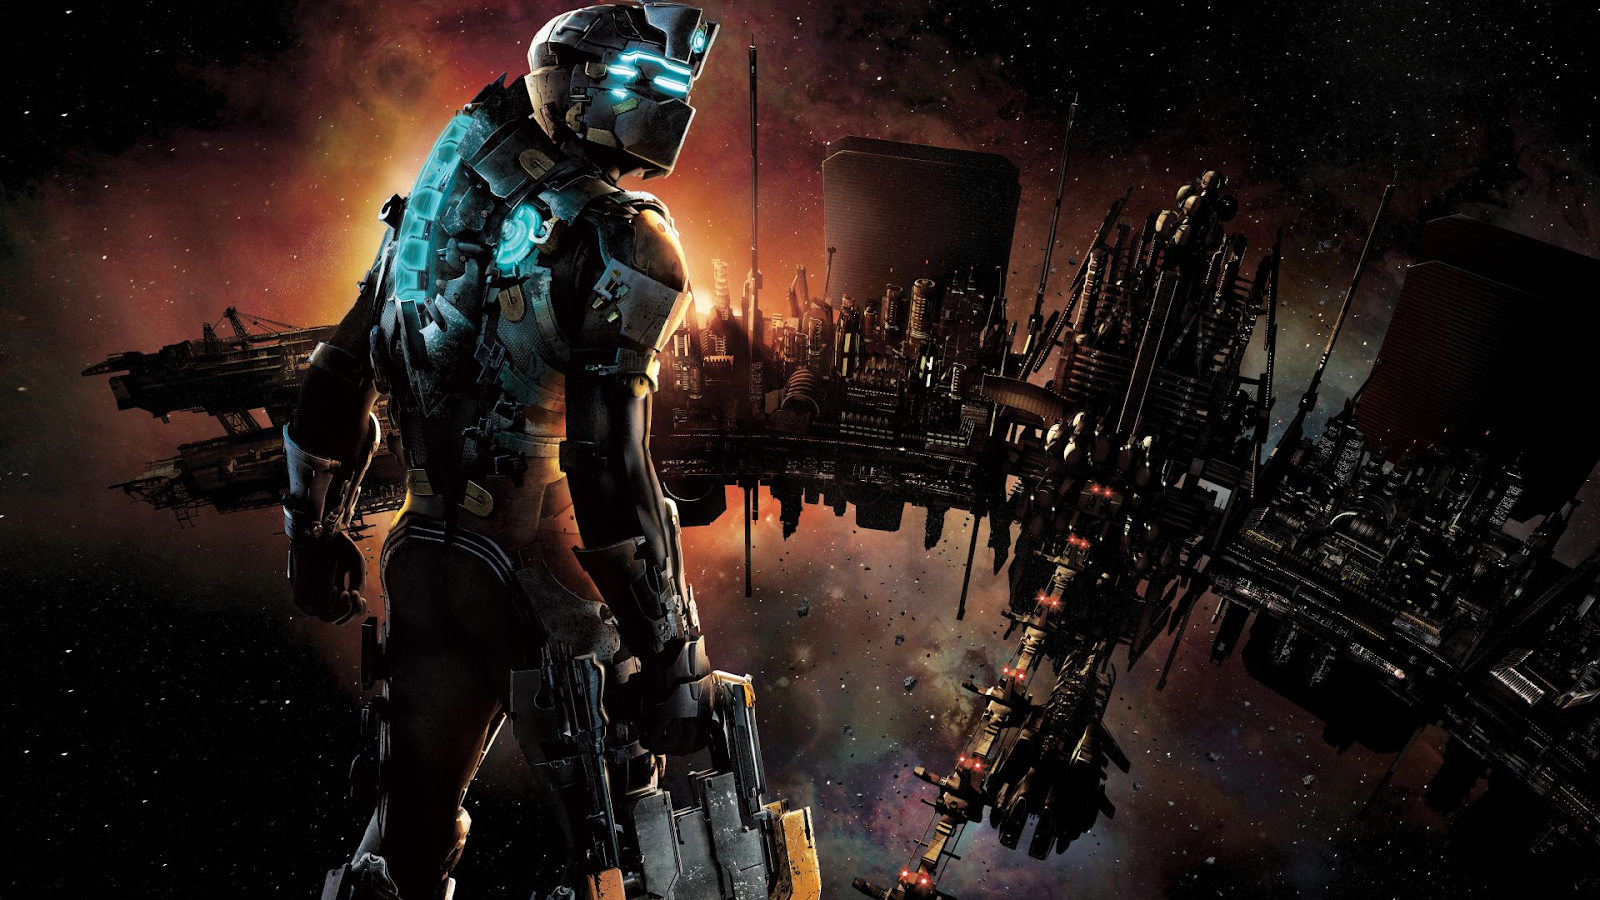 5. Dead Space